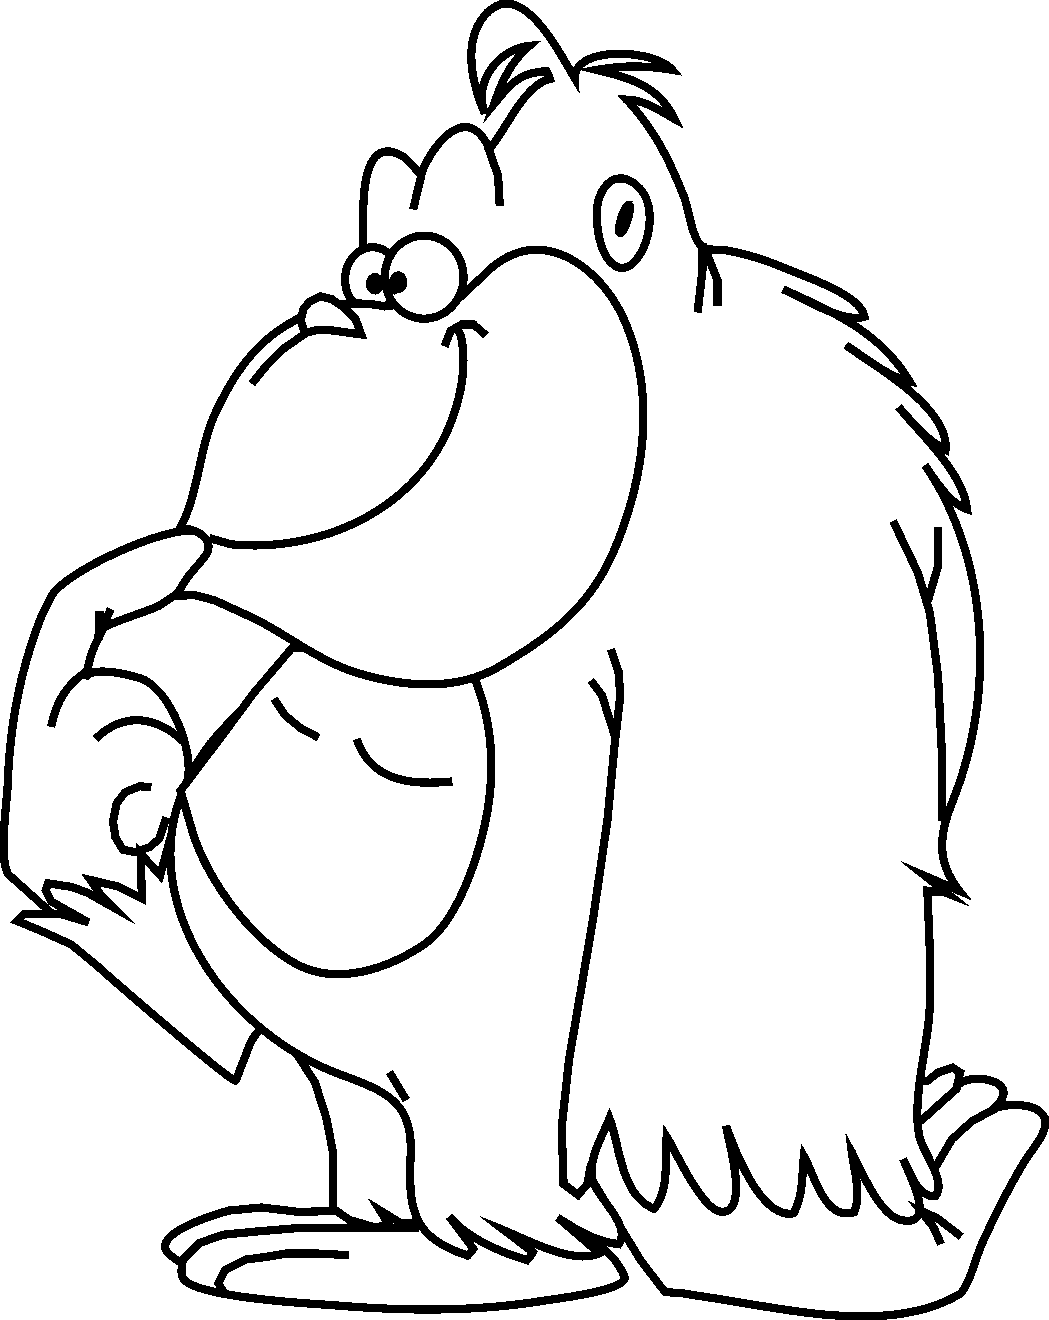 Monkey Coloring Pages of Animals